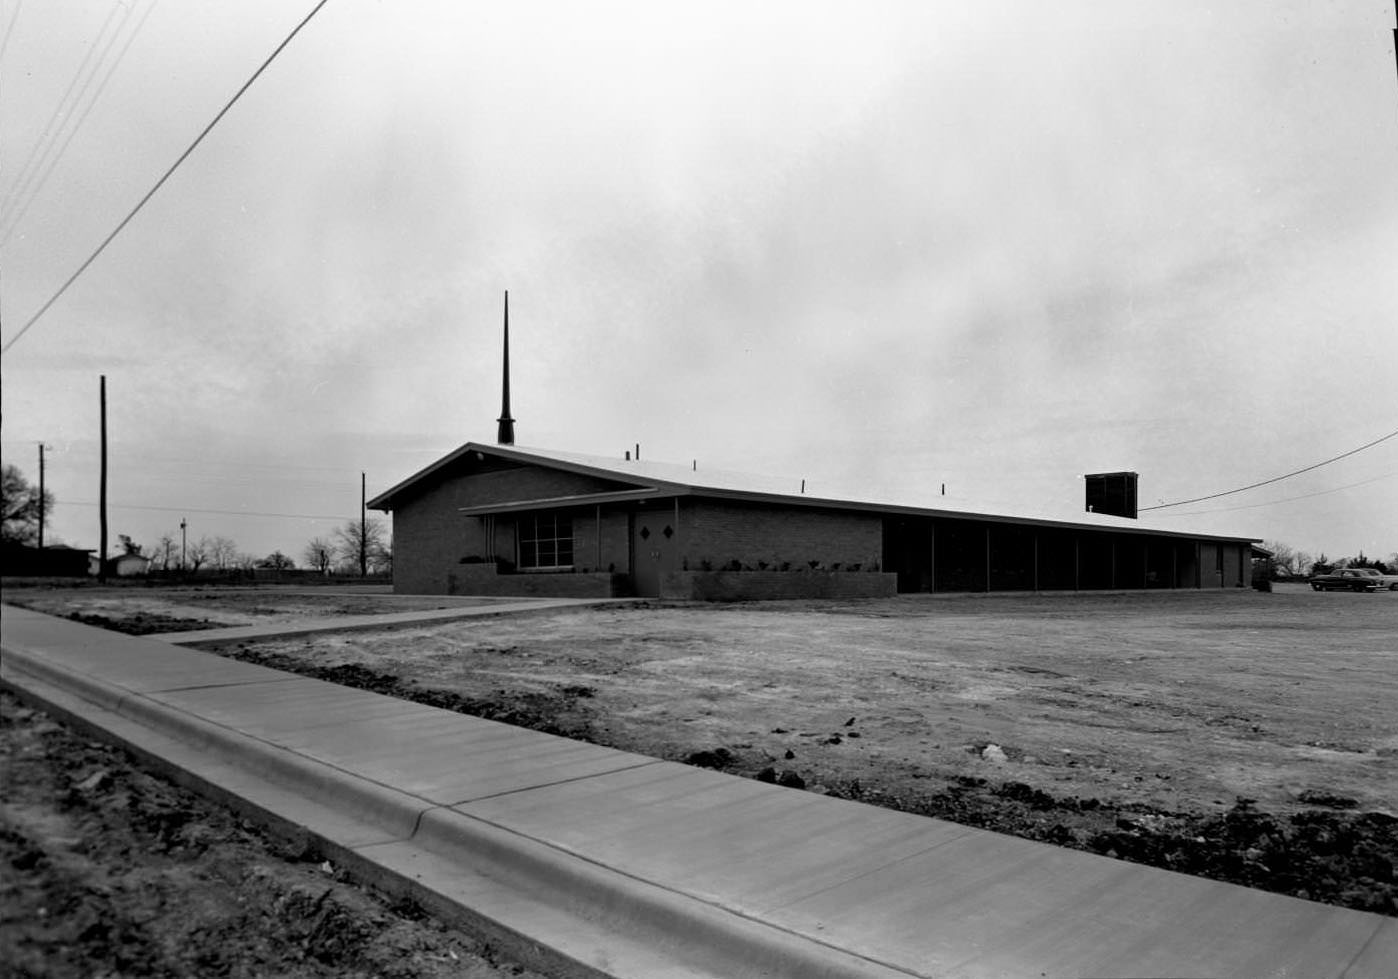 Exterior view of a Baptist Church in South Austin, 1957